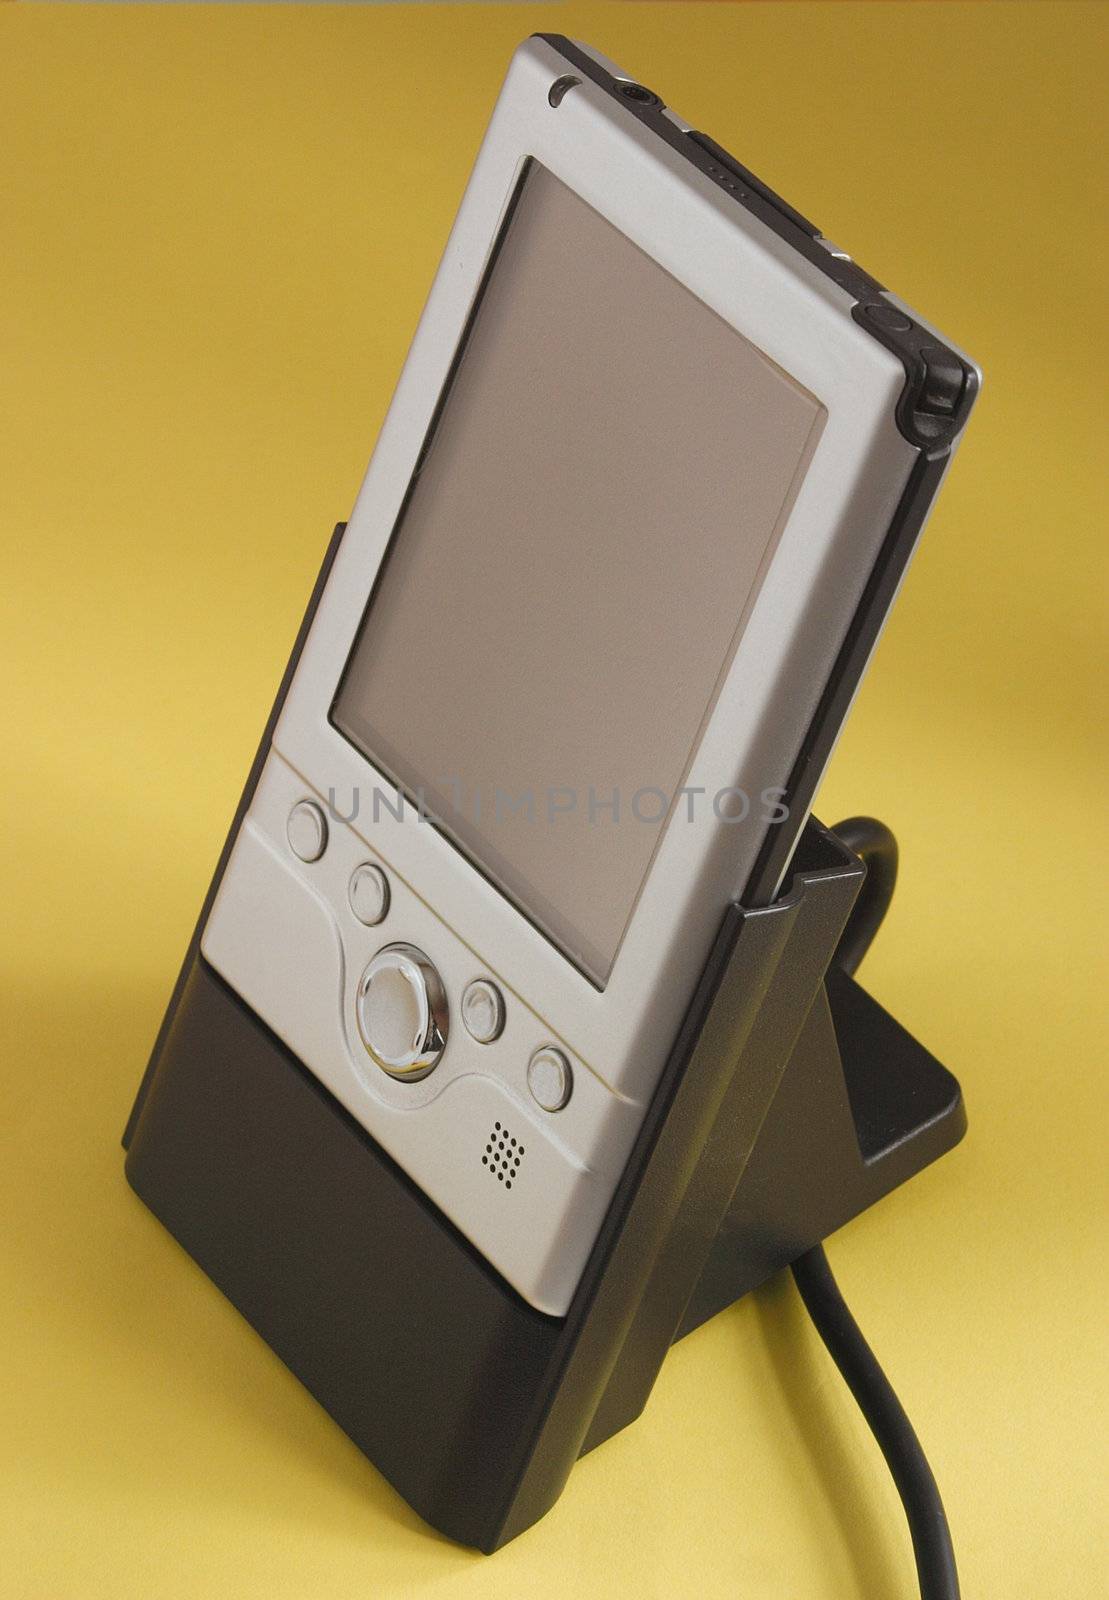 small silver palmtop pc in its charger